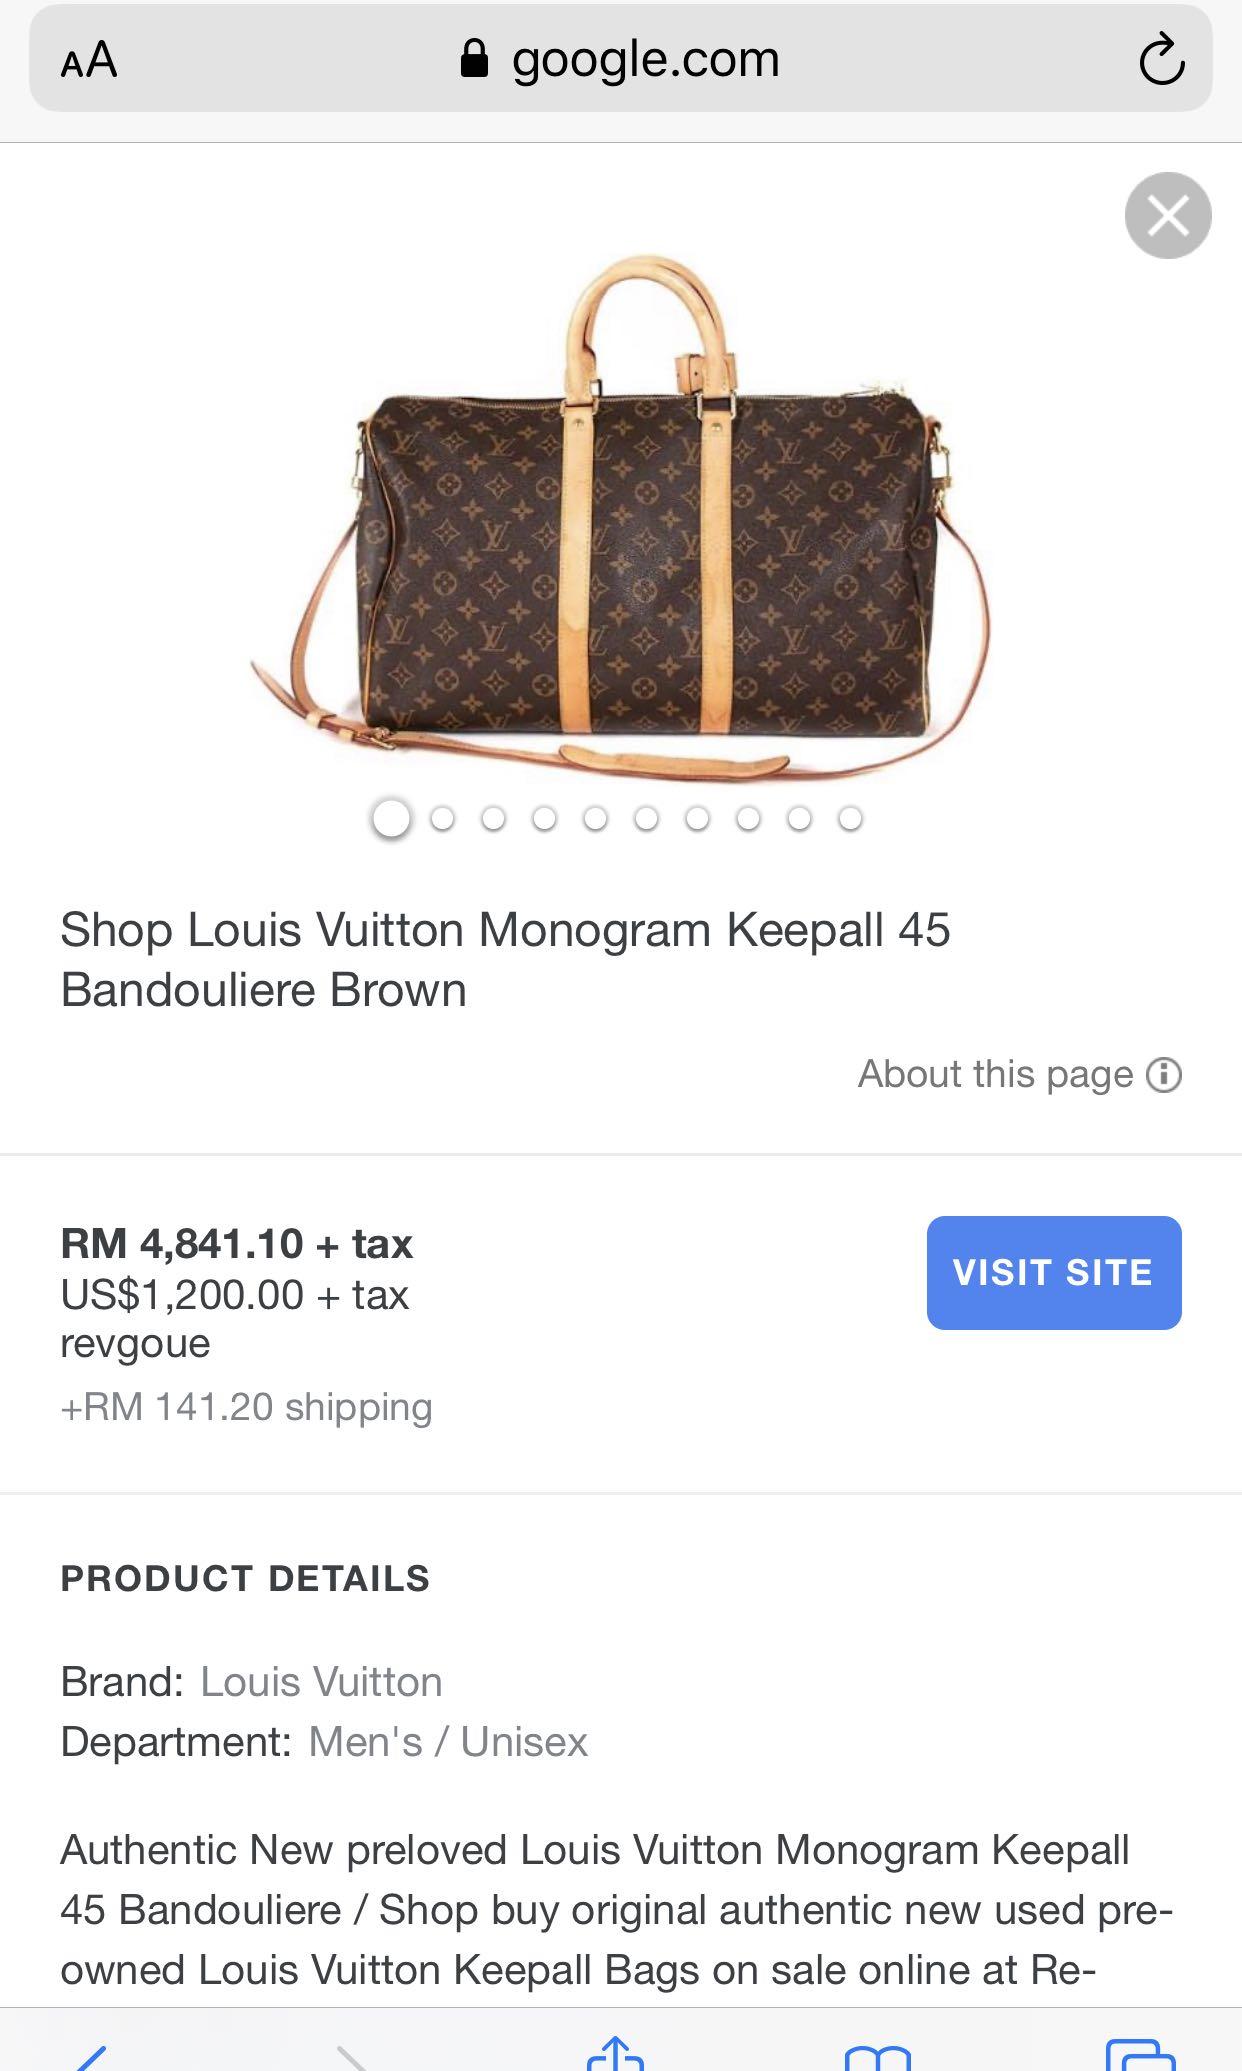 Sell Or Buy A Used Louis Vuitton Speedy 35